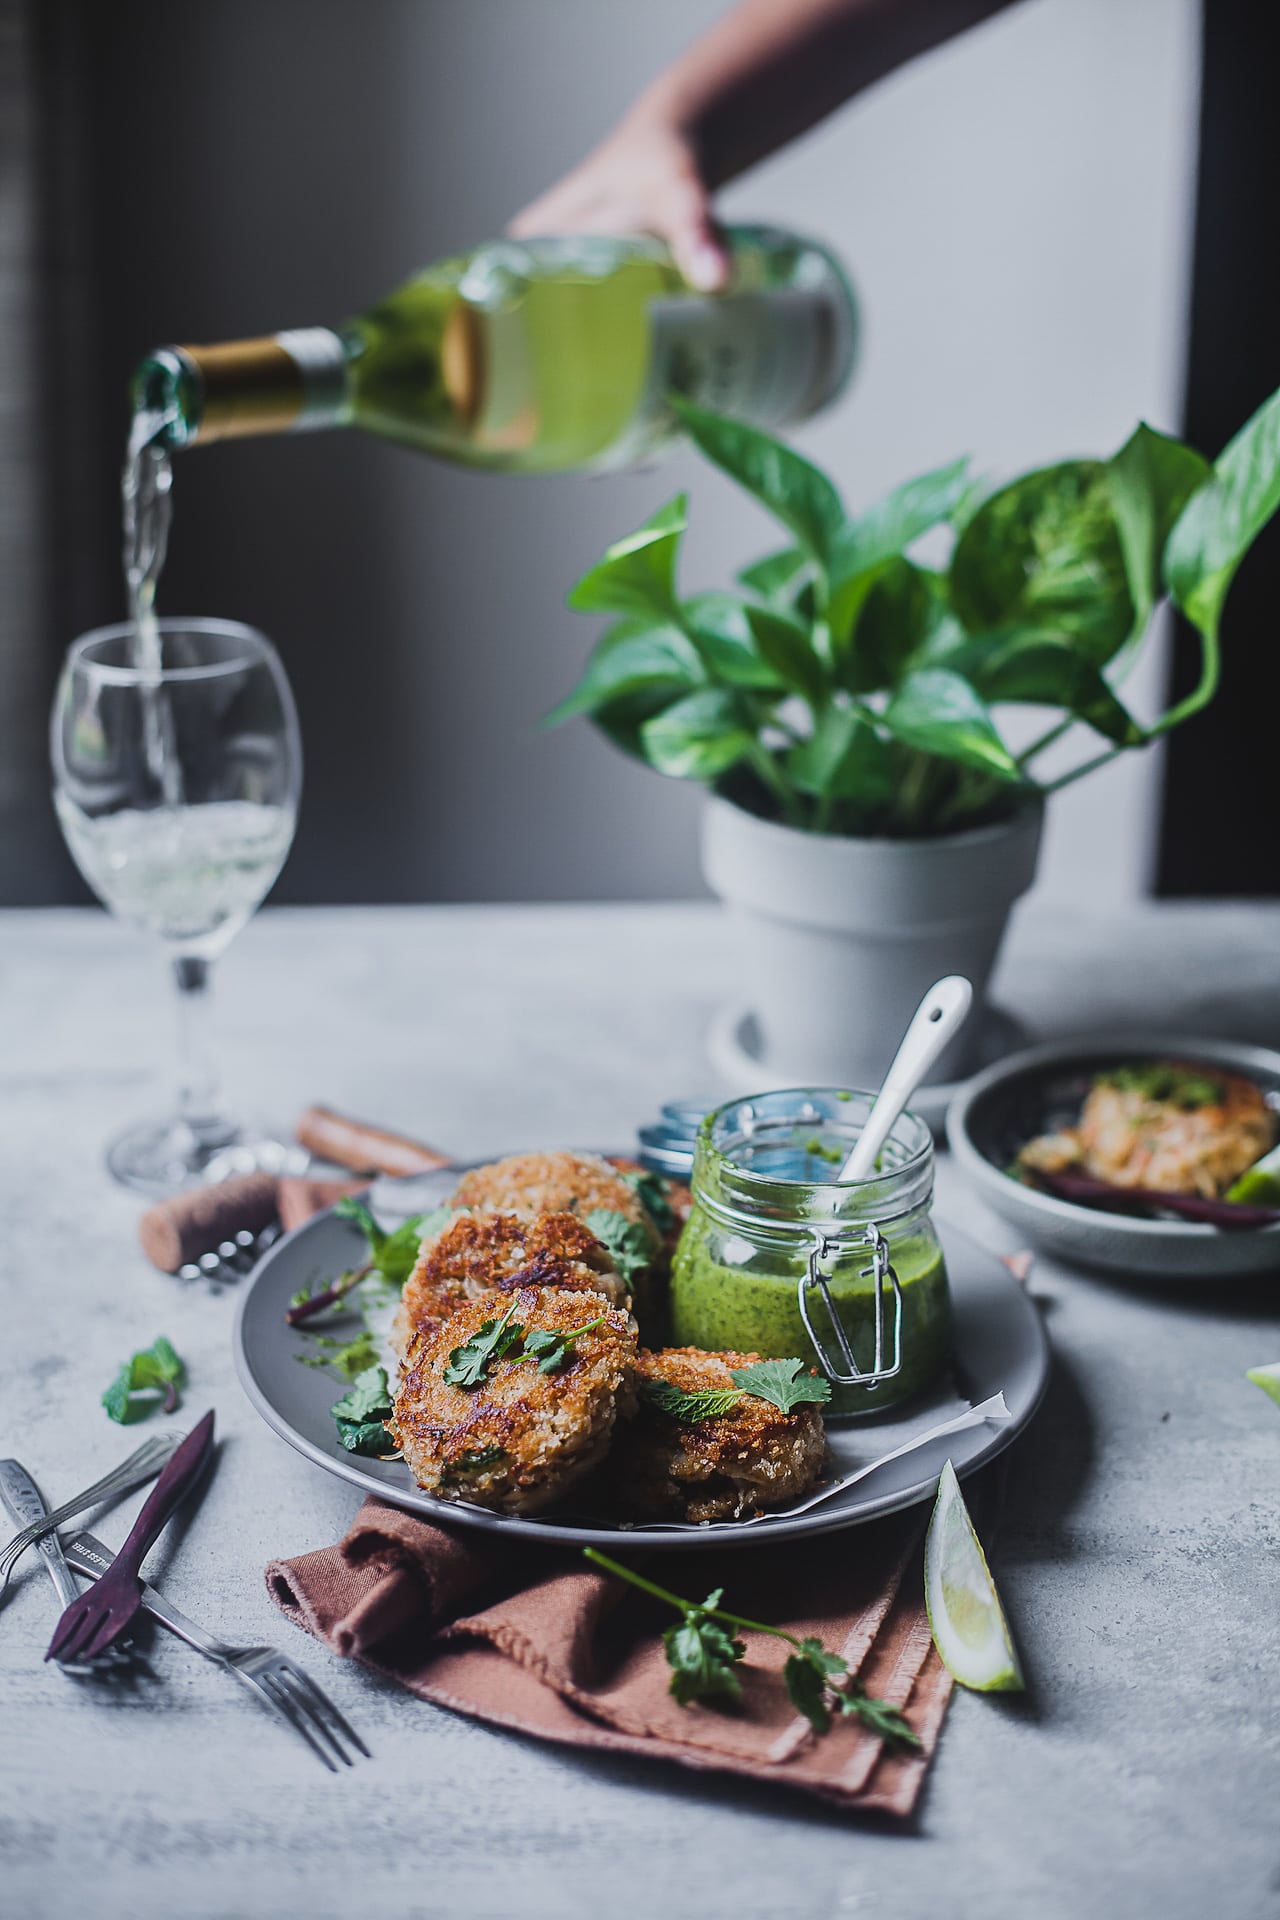 Spiced Crab Cake with Chimichurri Sauce | Playful Cooking